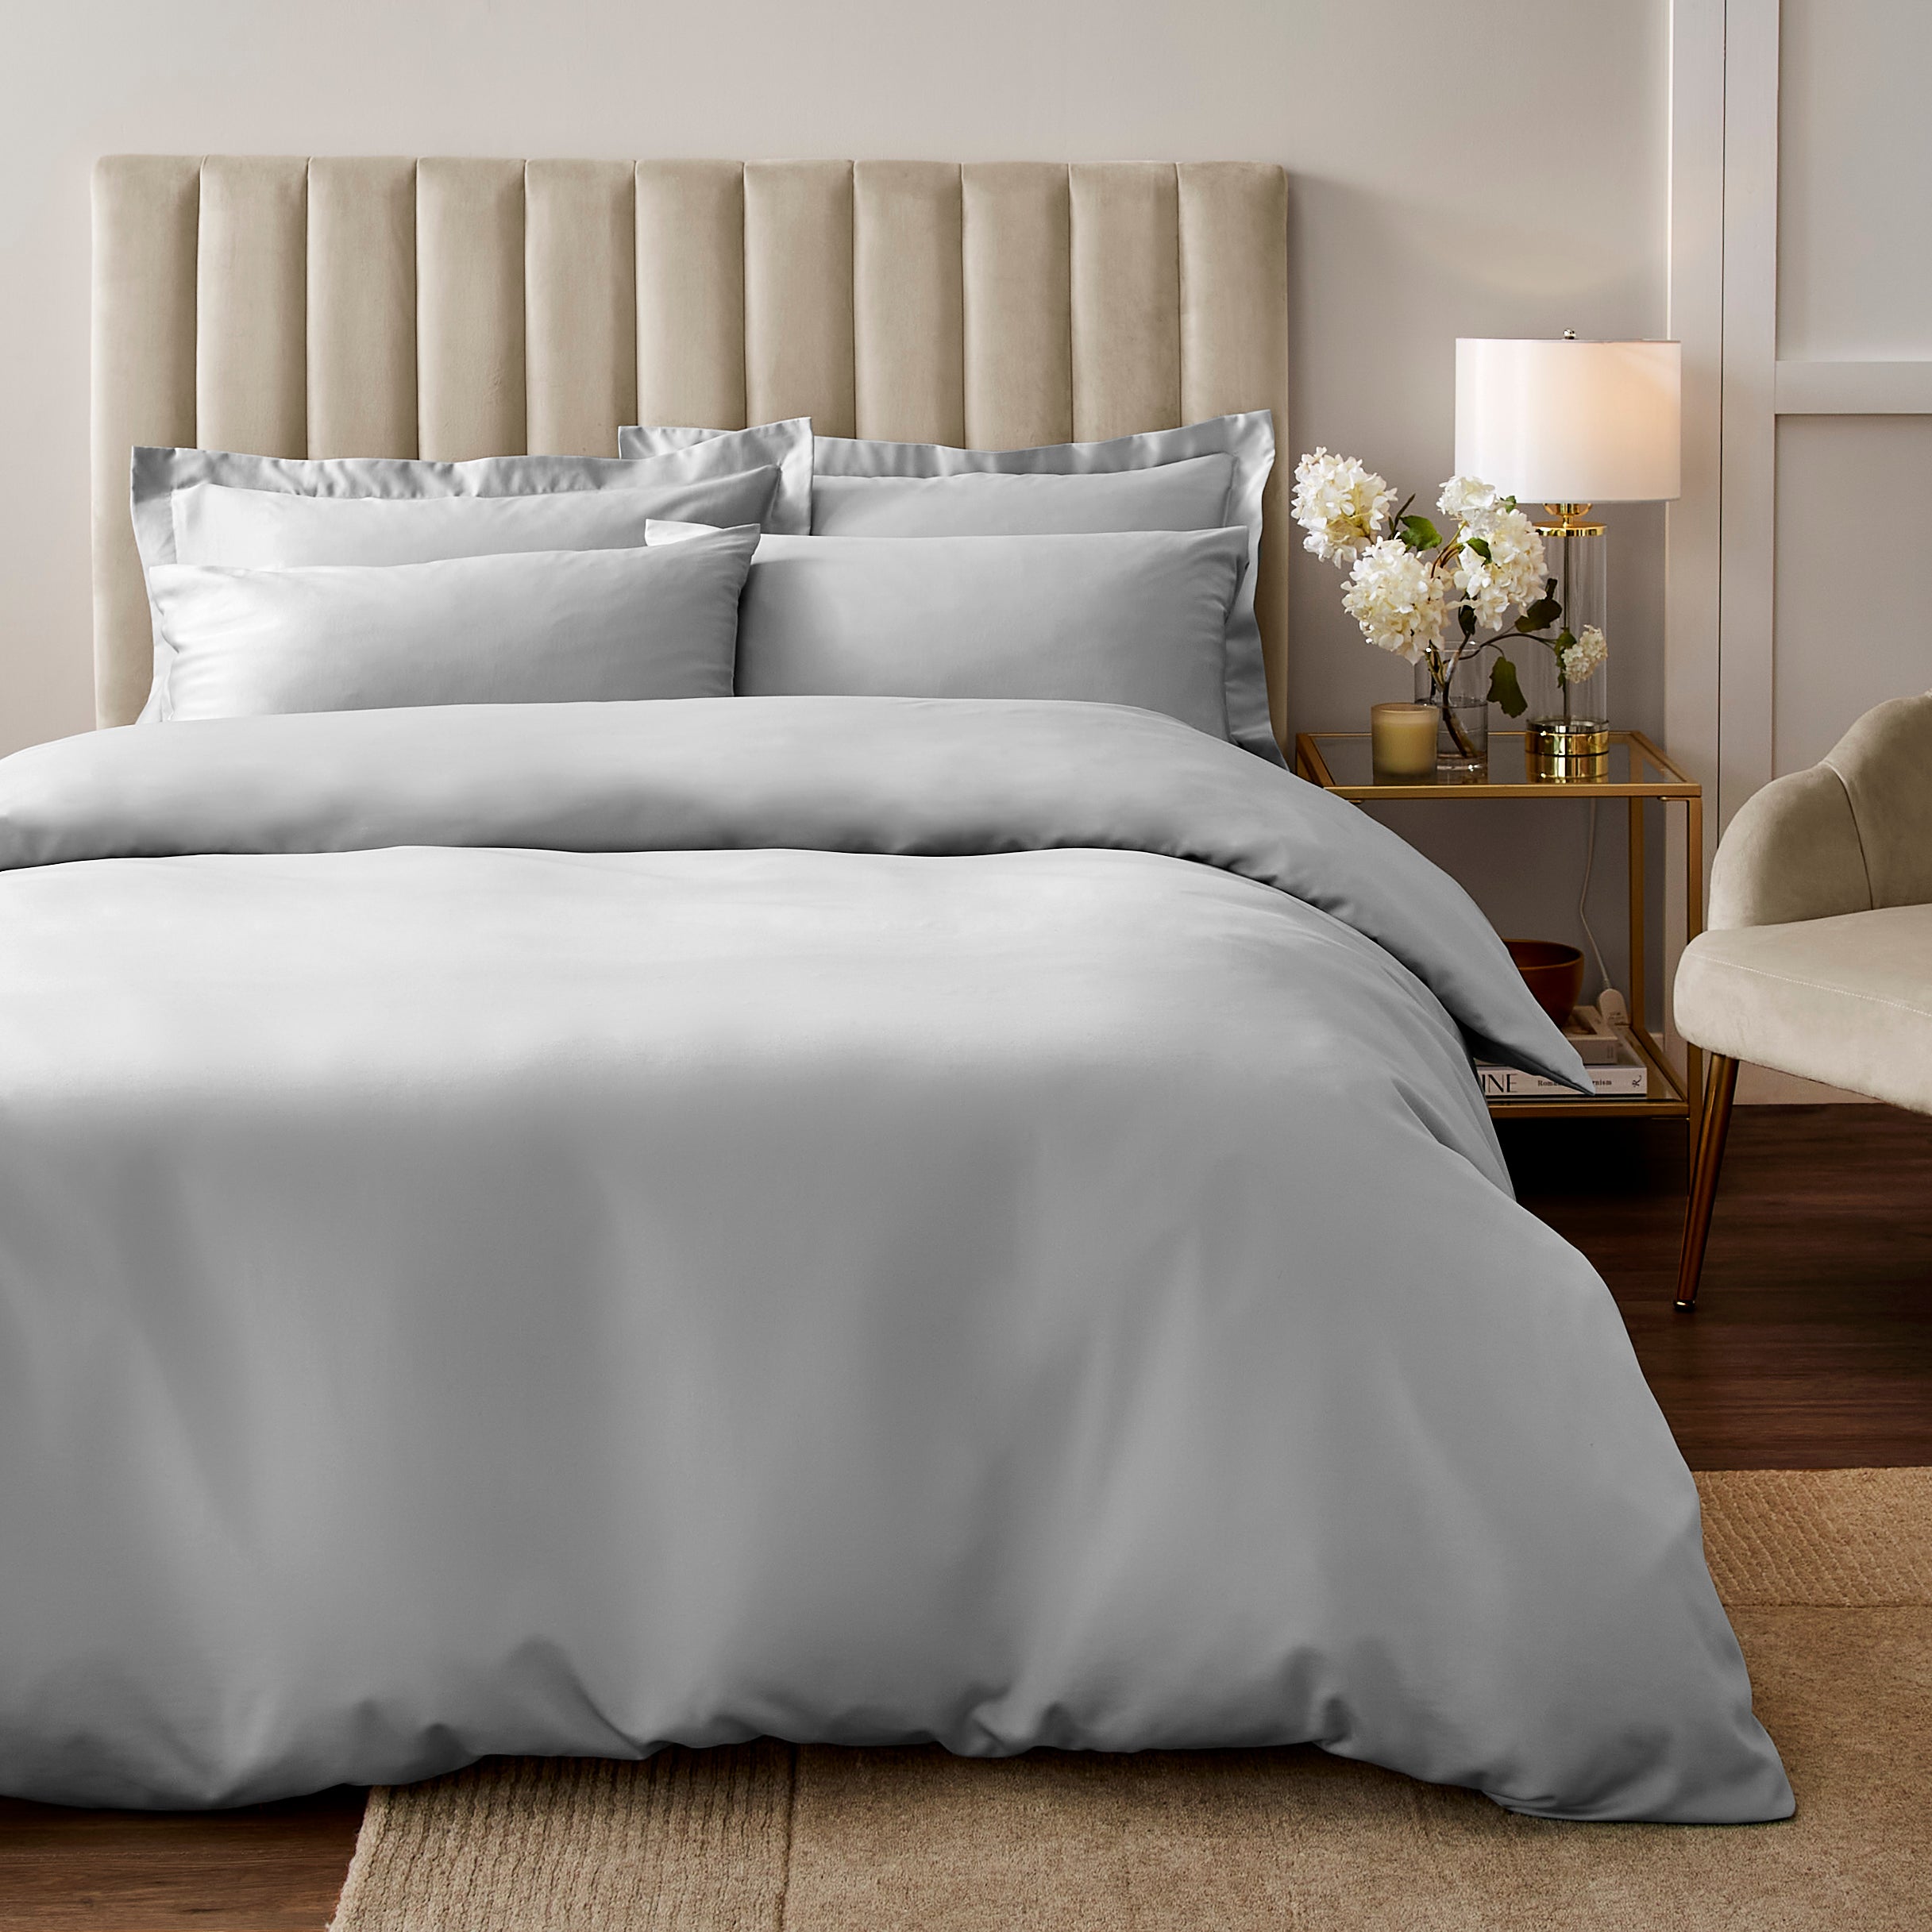 Soft Silky Duvet Cover And Pillowcase Set Silver